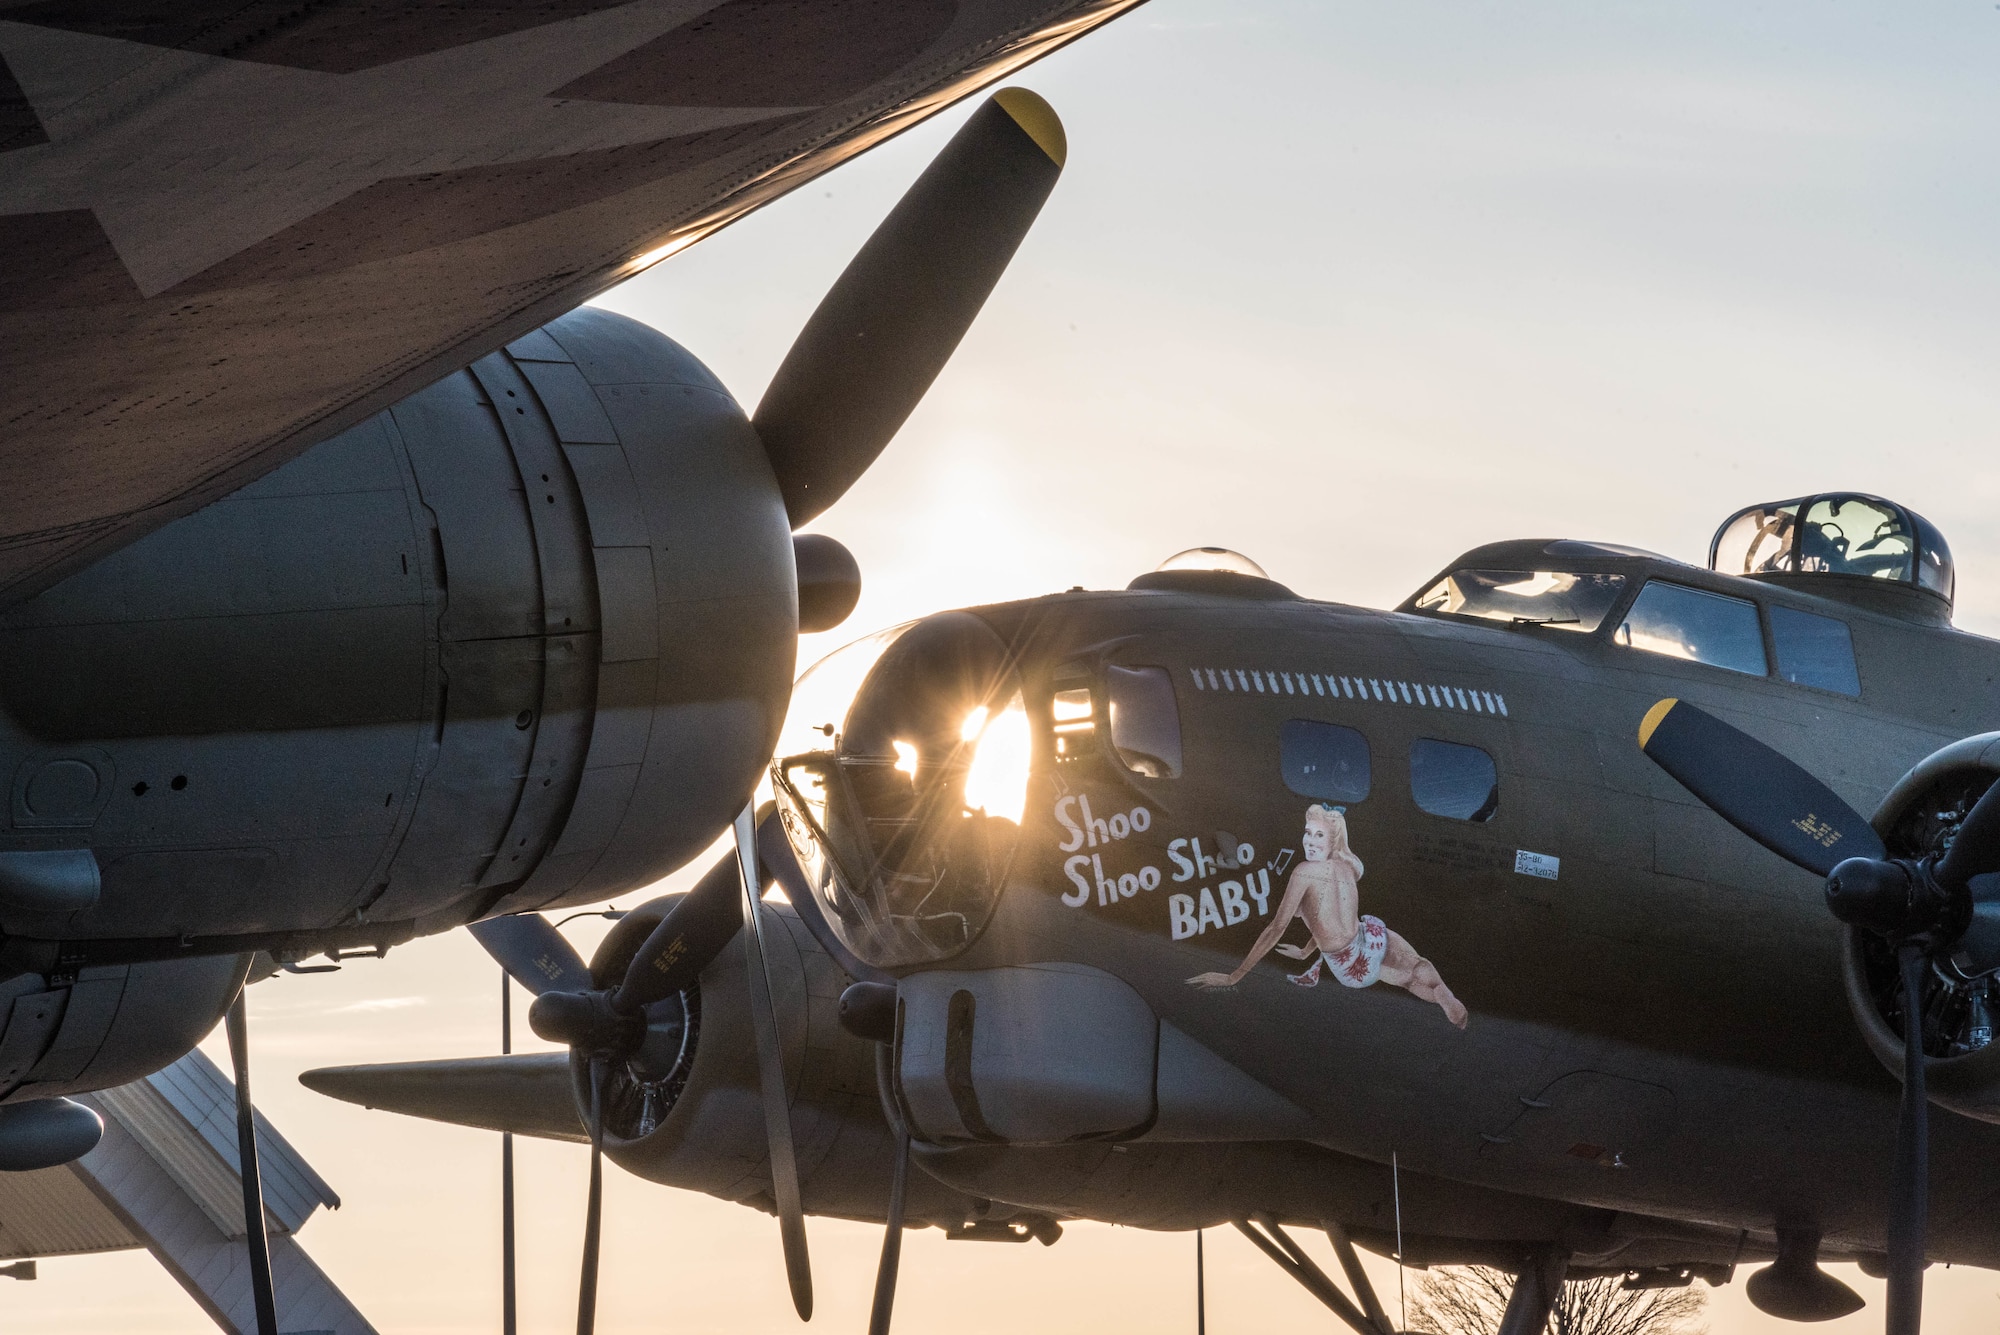 (03/14/2018) -- The B-17F Memphis Belle, left, poses for photos along with the B-17G Shoo Shoo Baby at the National Museum of the United States Air Force on March 14, 2018. Plans call for the aircraft to be placed on permanent public display in the WWII Gallery here at the National Museum of the U.S. Air Force on May 17, 2018. (U.S. Air Force photo by Kevin Lush)